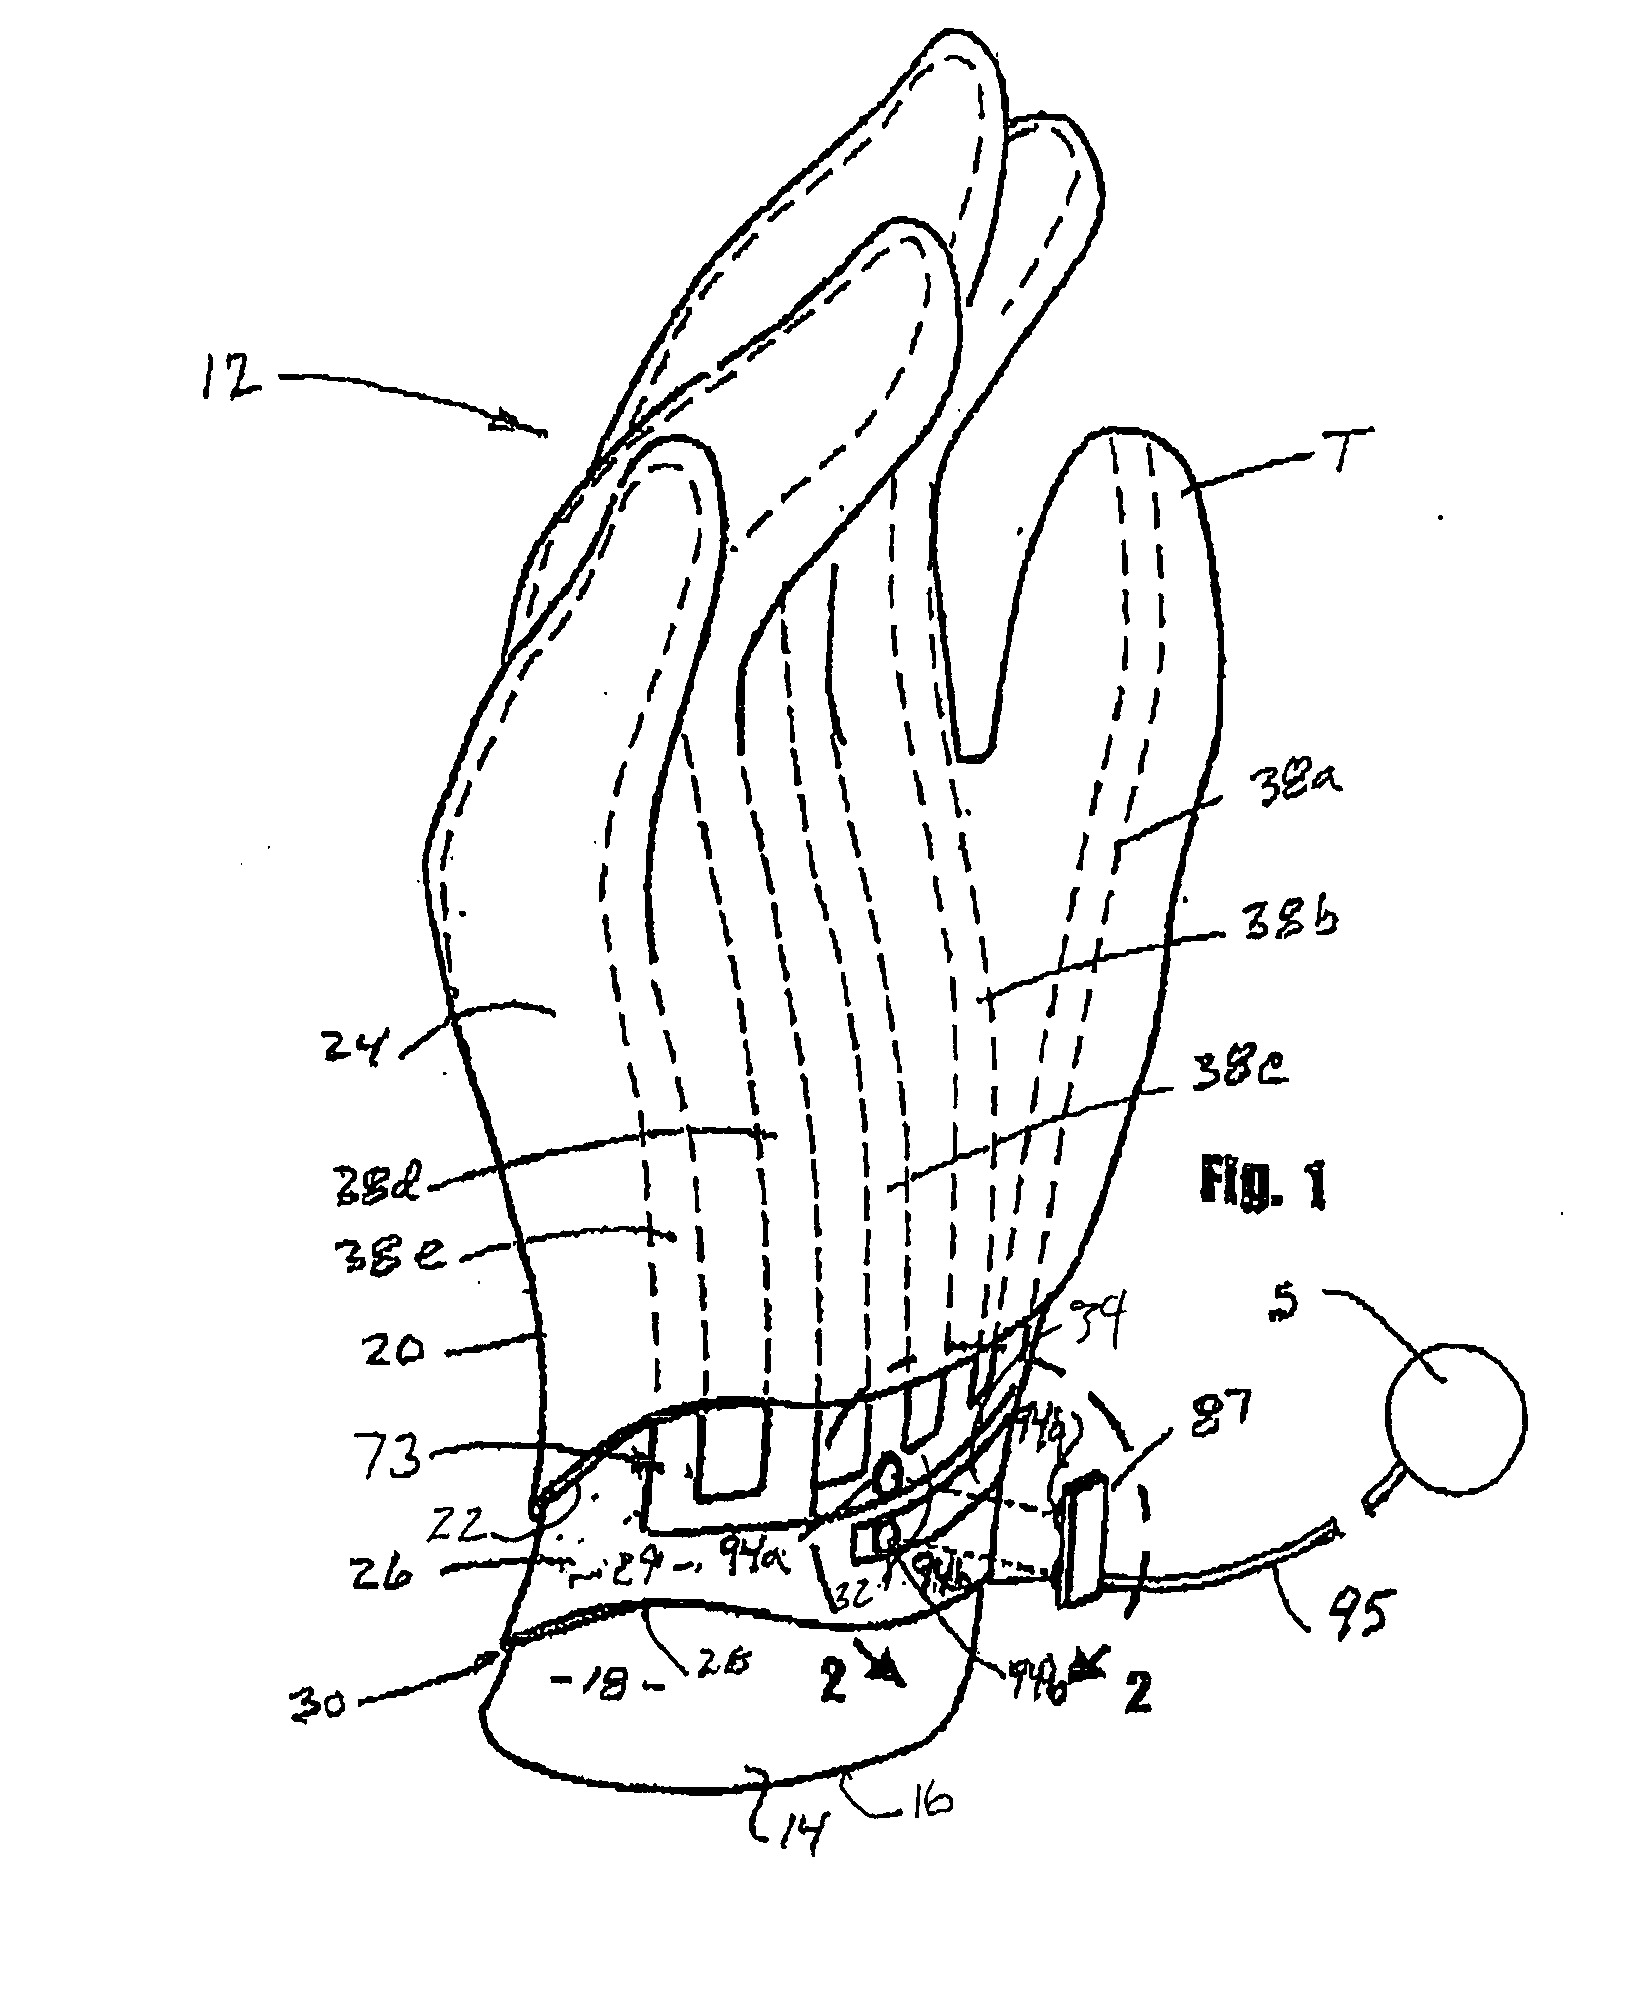 Electrically heated articles of apparel having variable heating characteristics and methods of making same